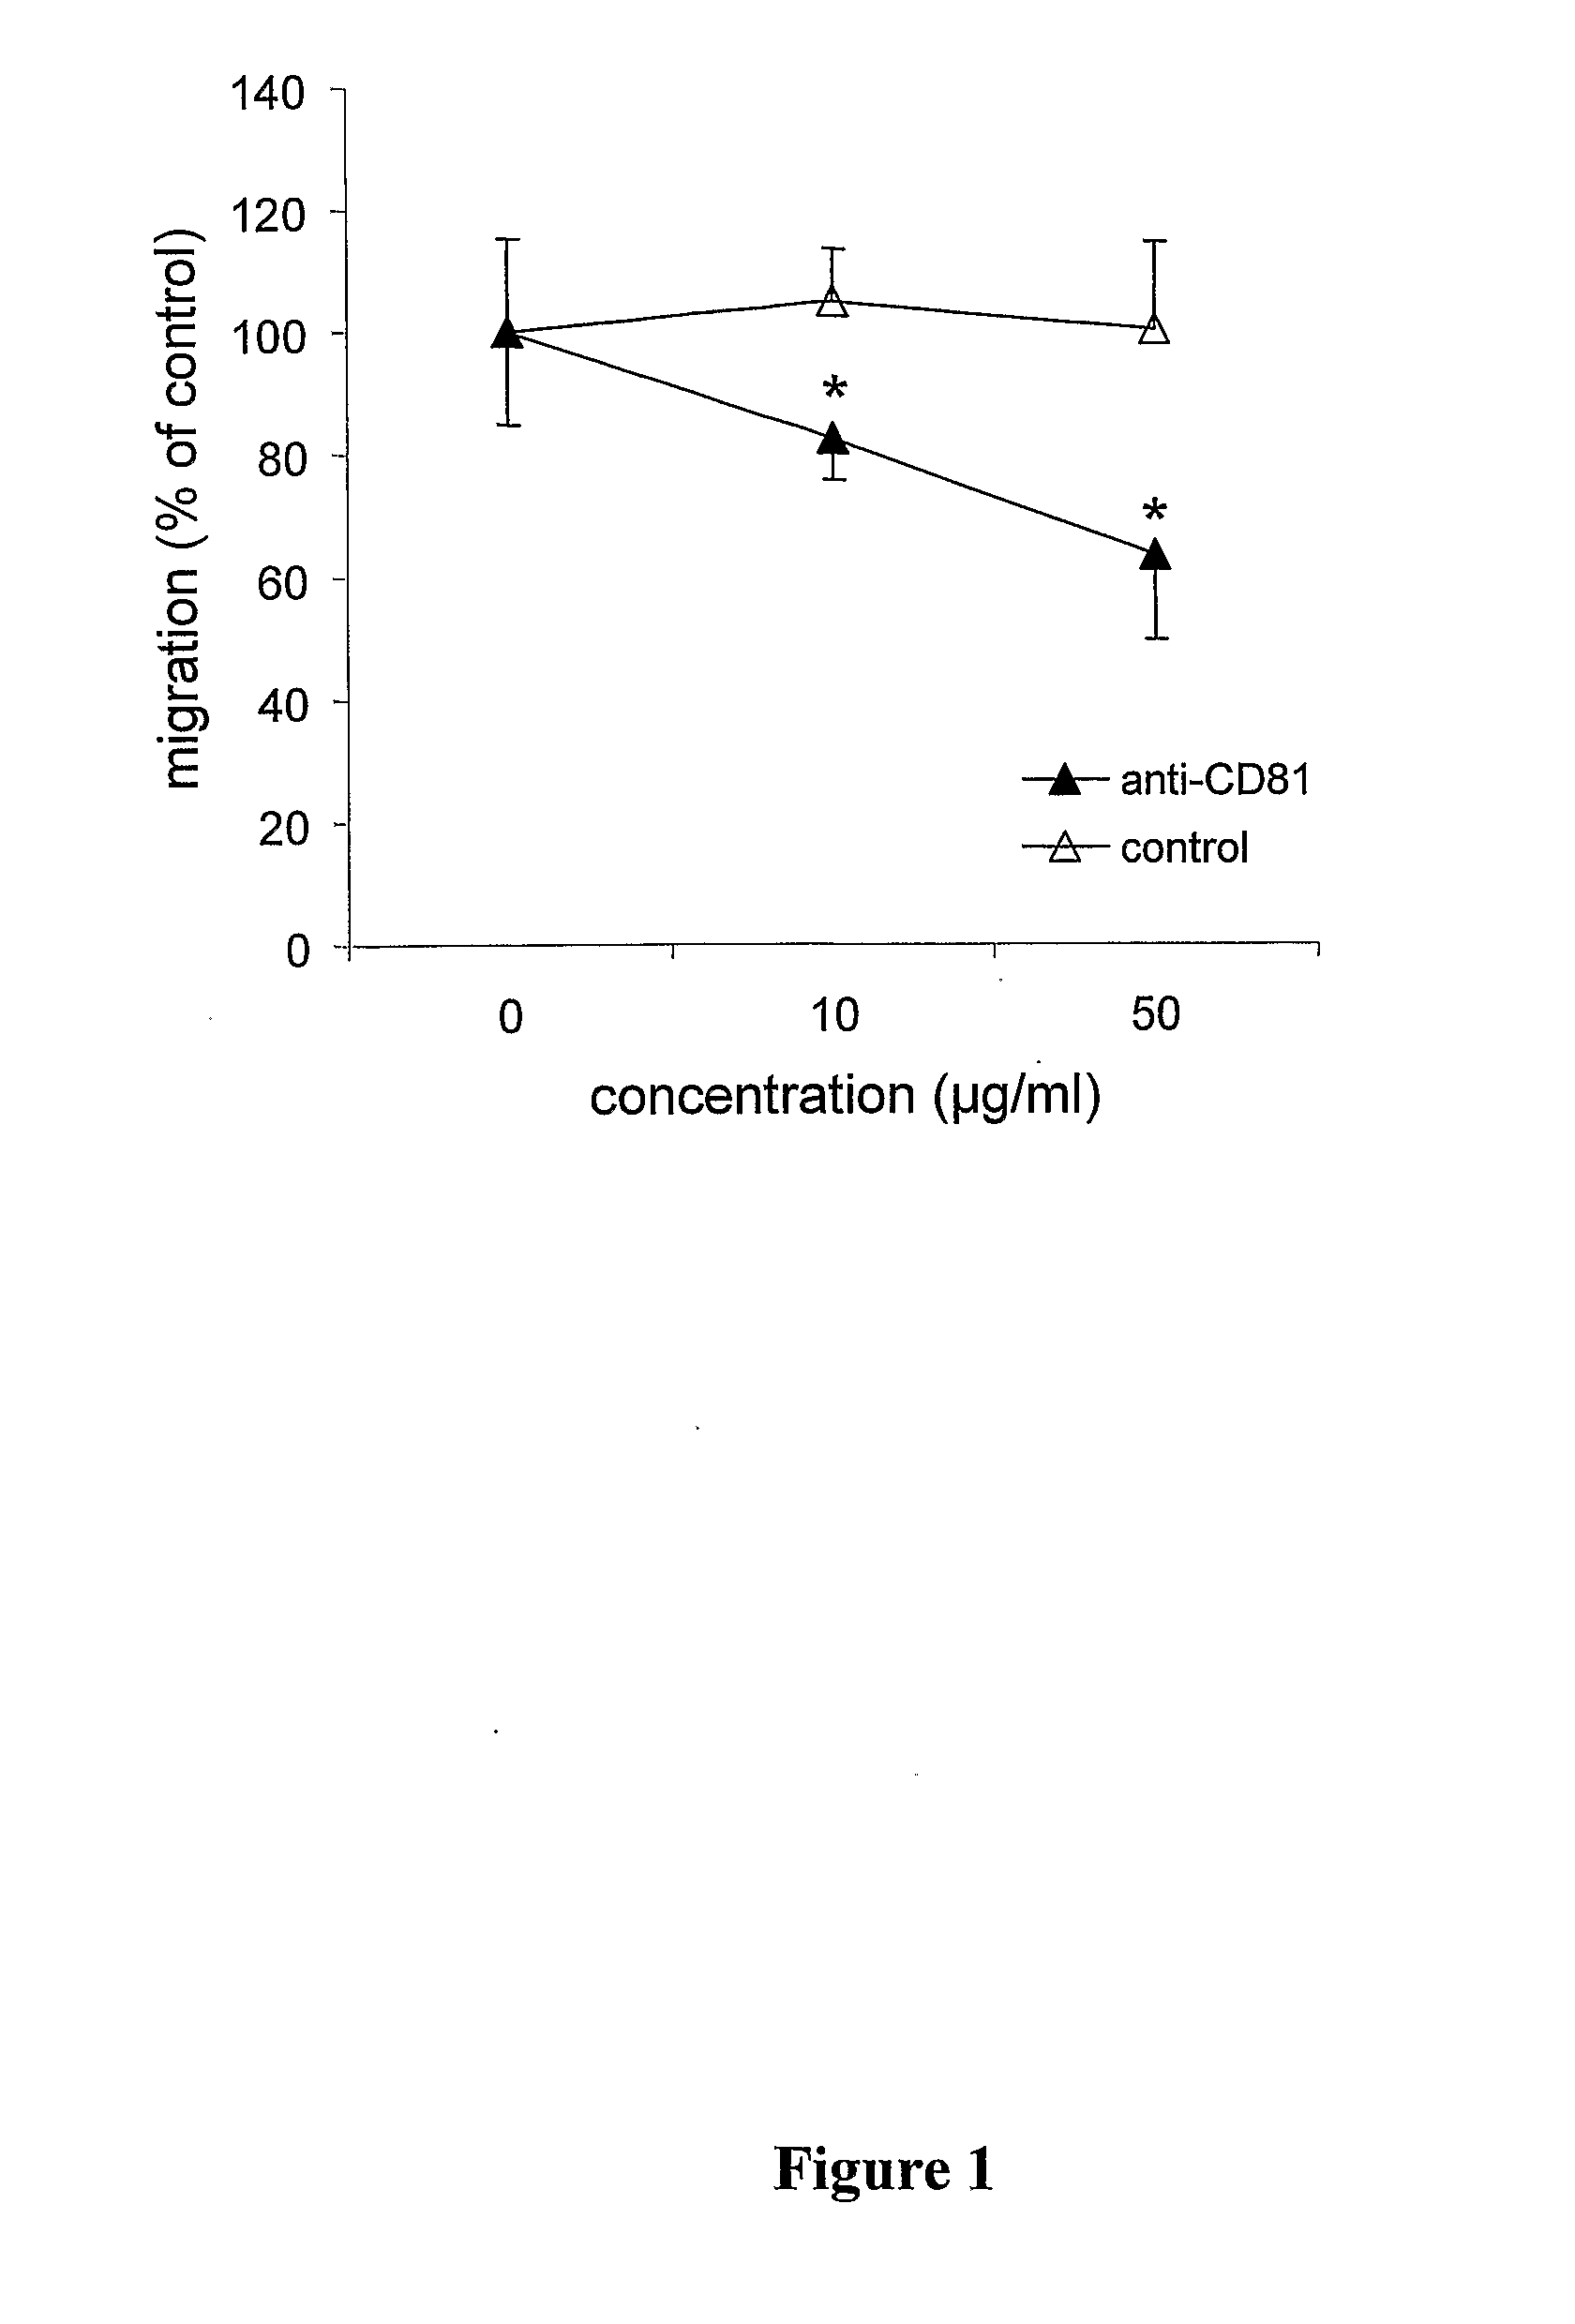 Method For Inhibiting The Transendothelial Migration Of Cells Such As Leukocytes Or Tumor Cells By A Cd-Binding Substance And Uses Thereof